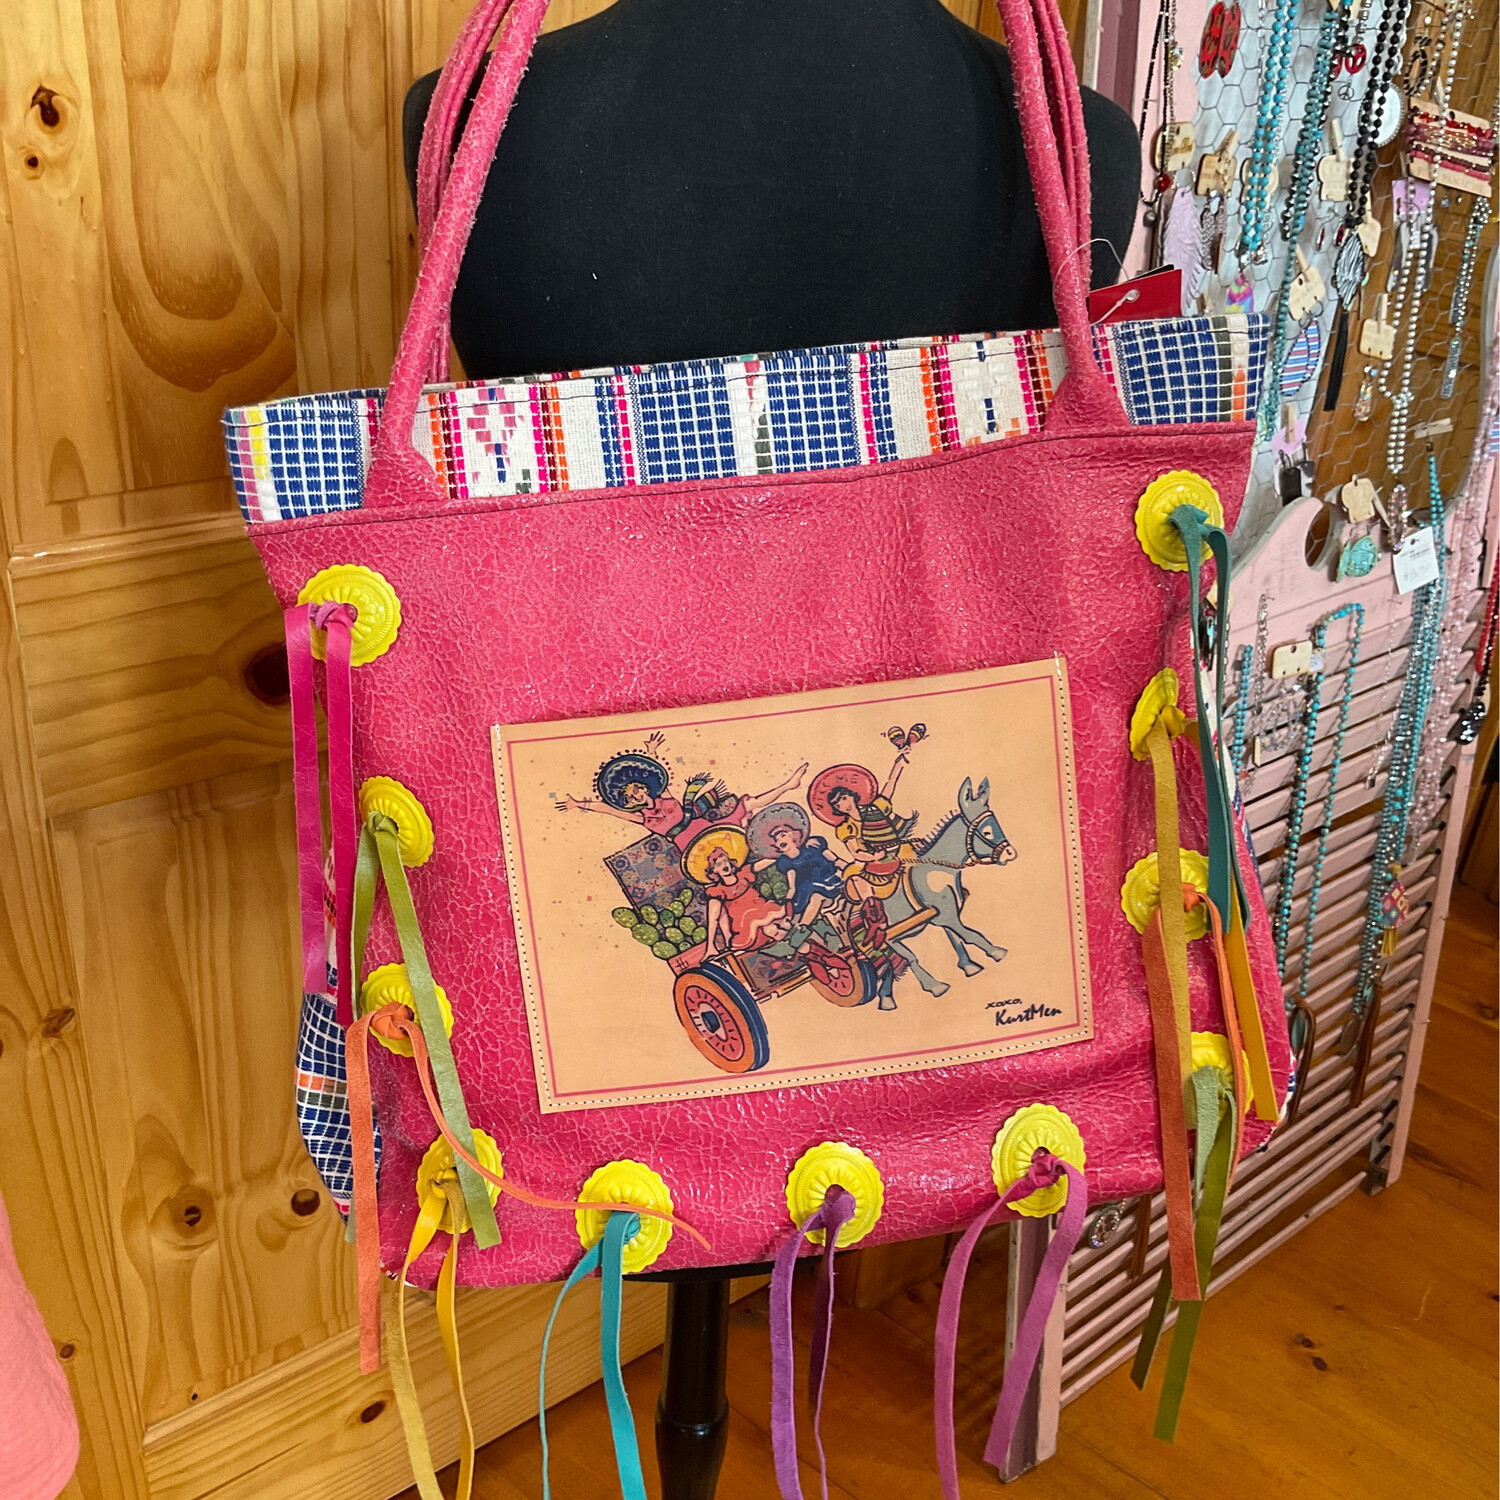 KM Design 1909-PinkCrackle Tall Weekender W/XOXO,Traveling Chicas Artwork